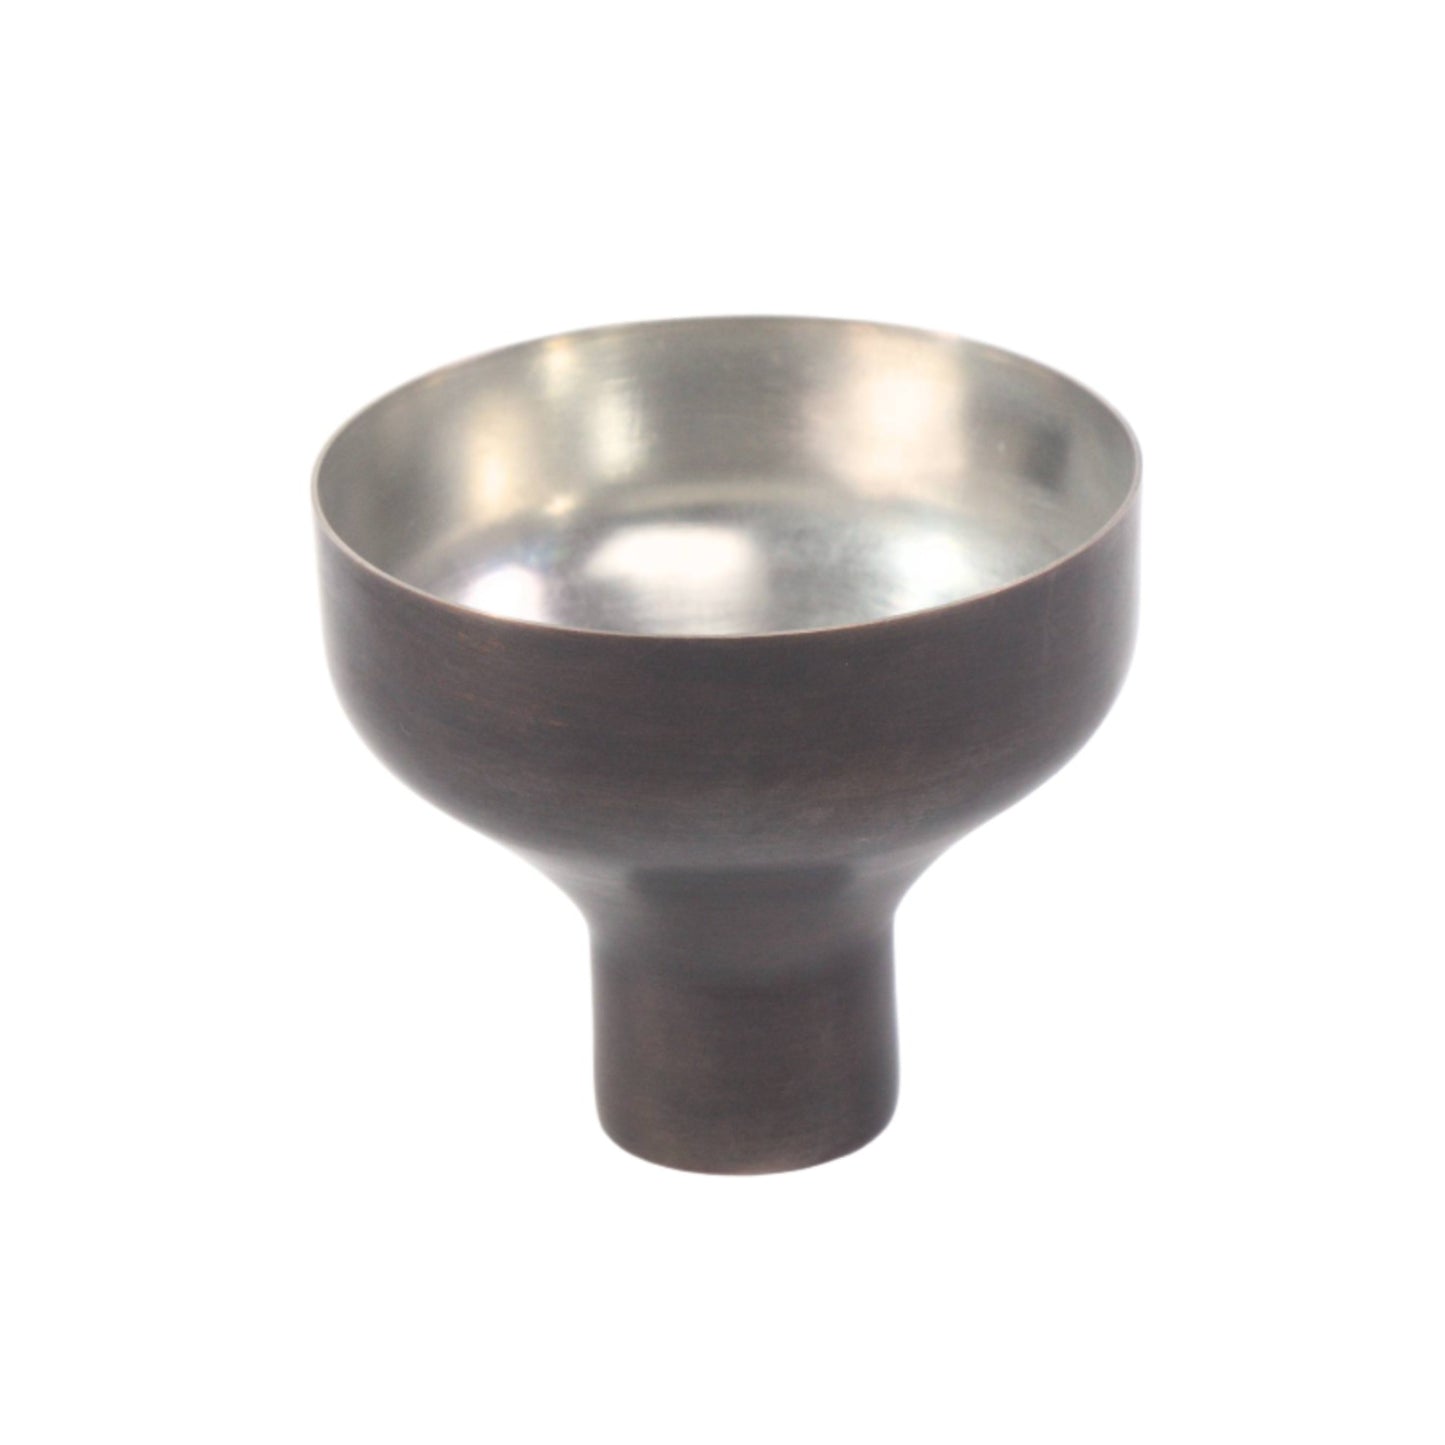 Copper Funnel for Turkish coffee pot